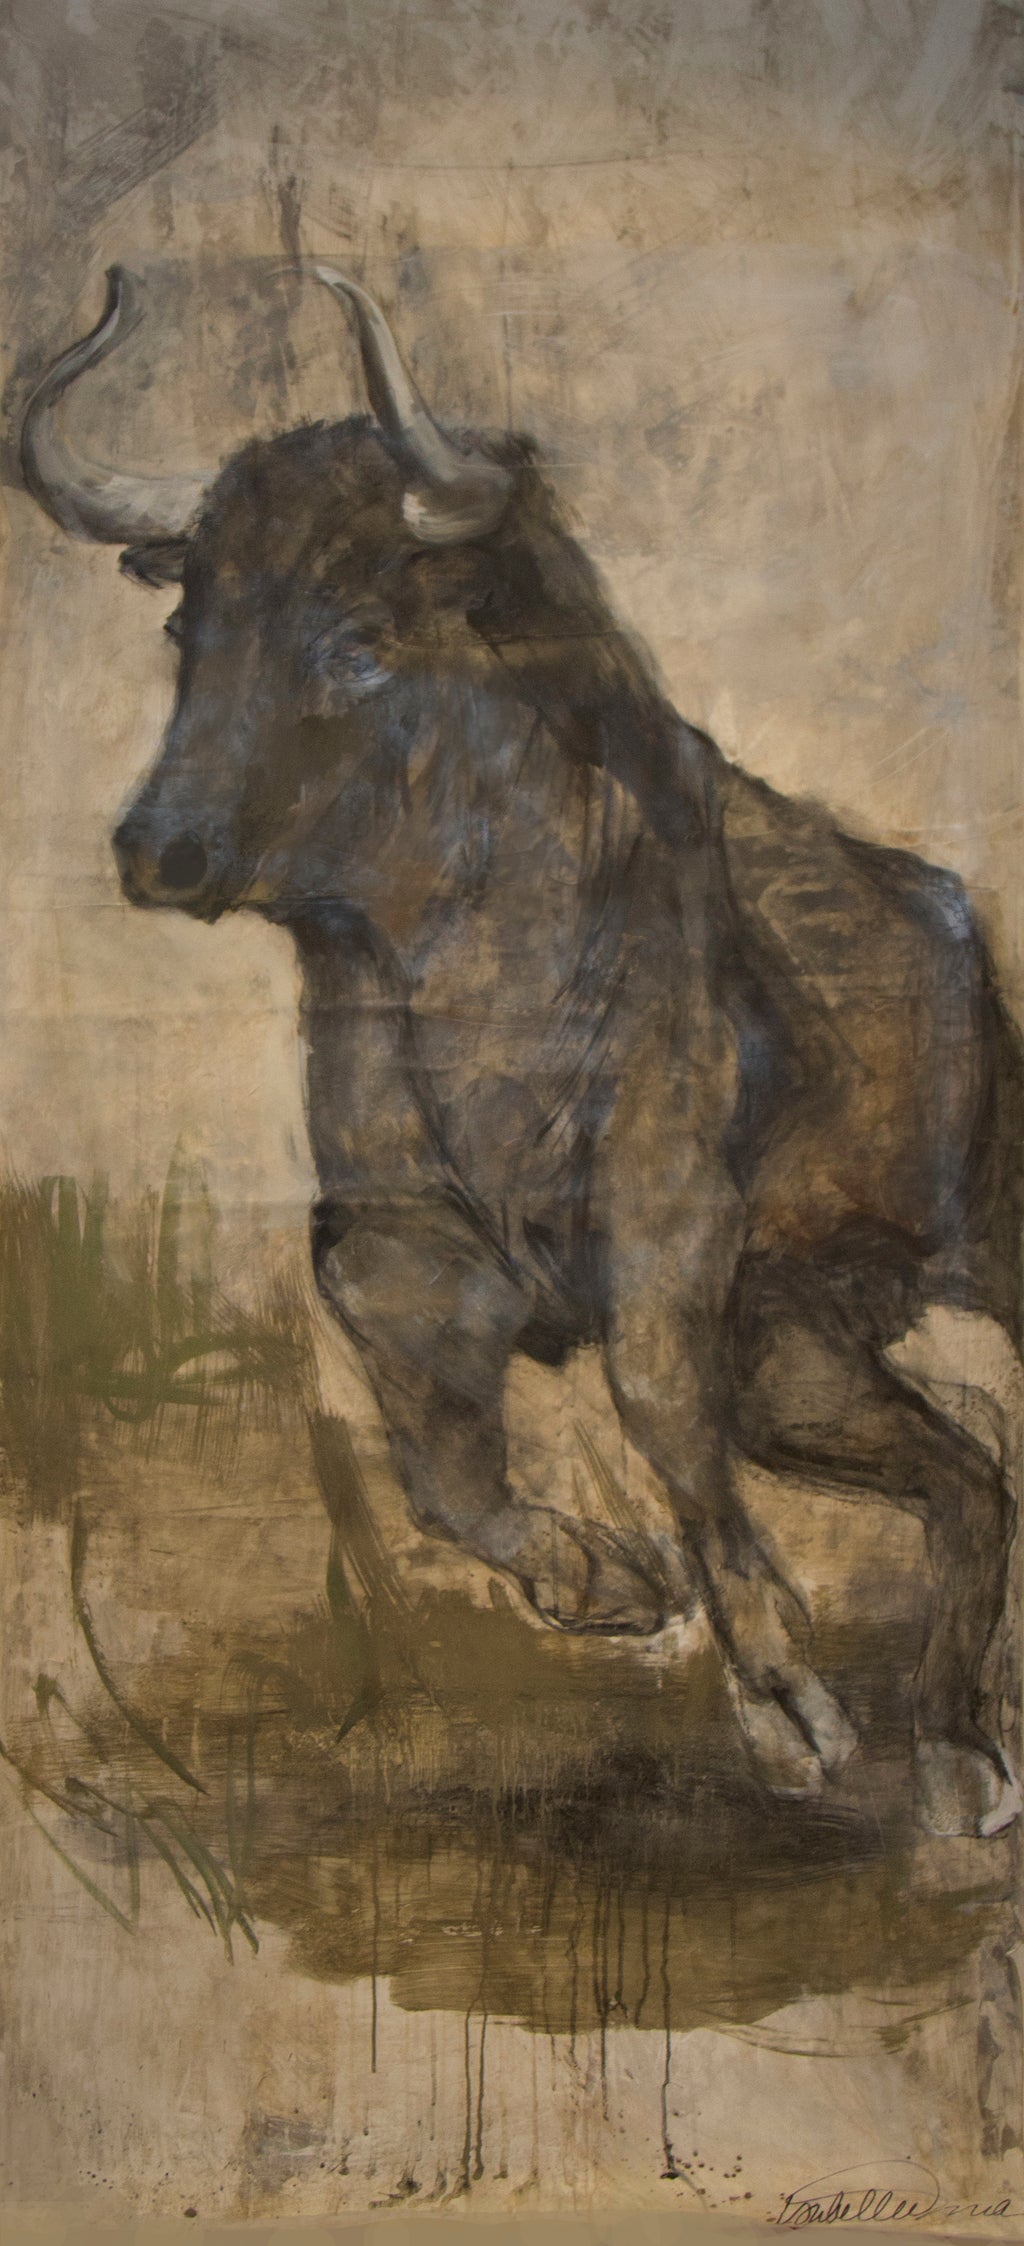 Samson the bull's partner Delilah, in muted natural tones, sweet and full of life. A fantastic piece for a lofty wall and space, perhaps with her pal Samson!